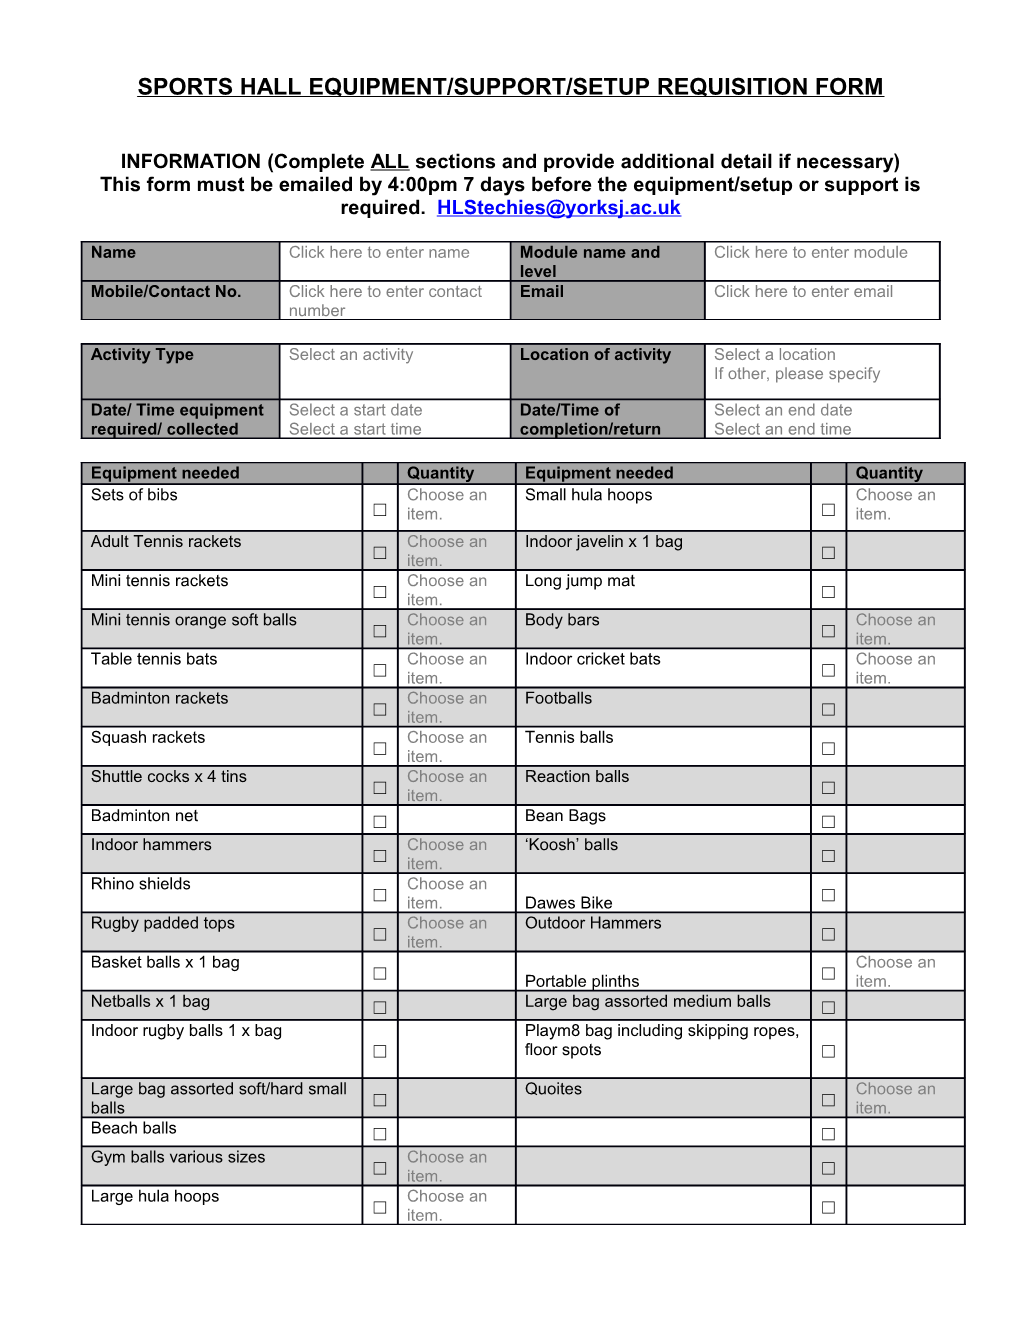 Sports Hall Equipment/Support/Setup Requisition Form